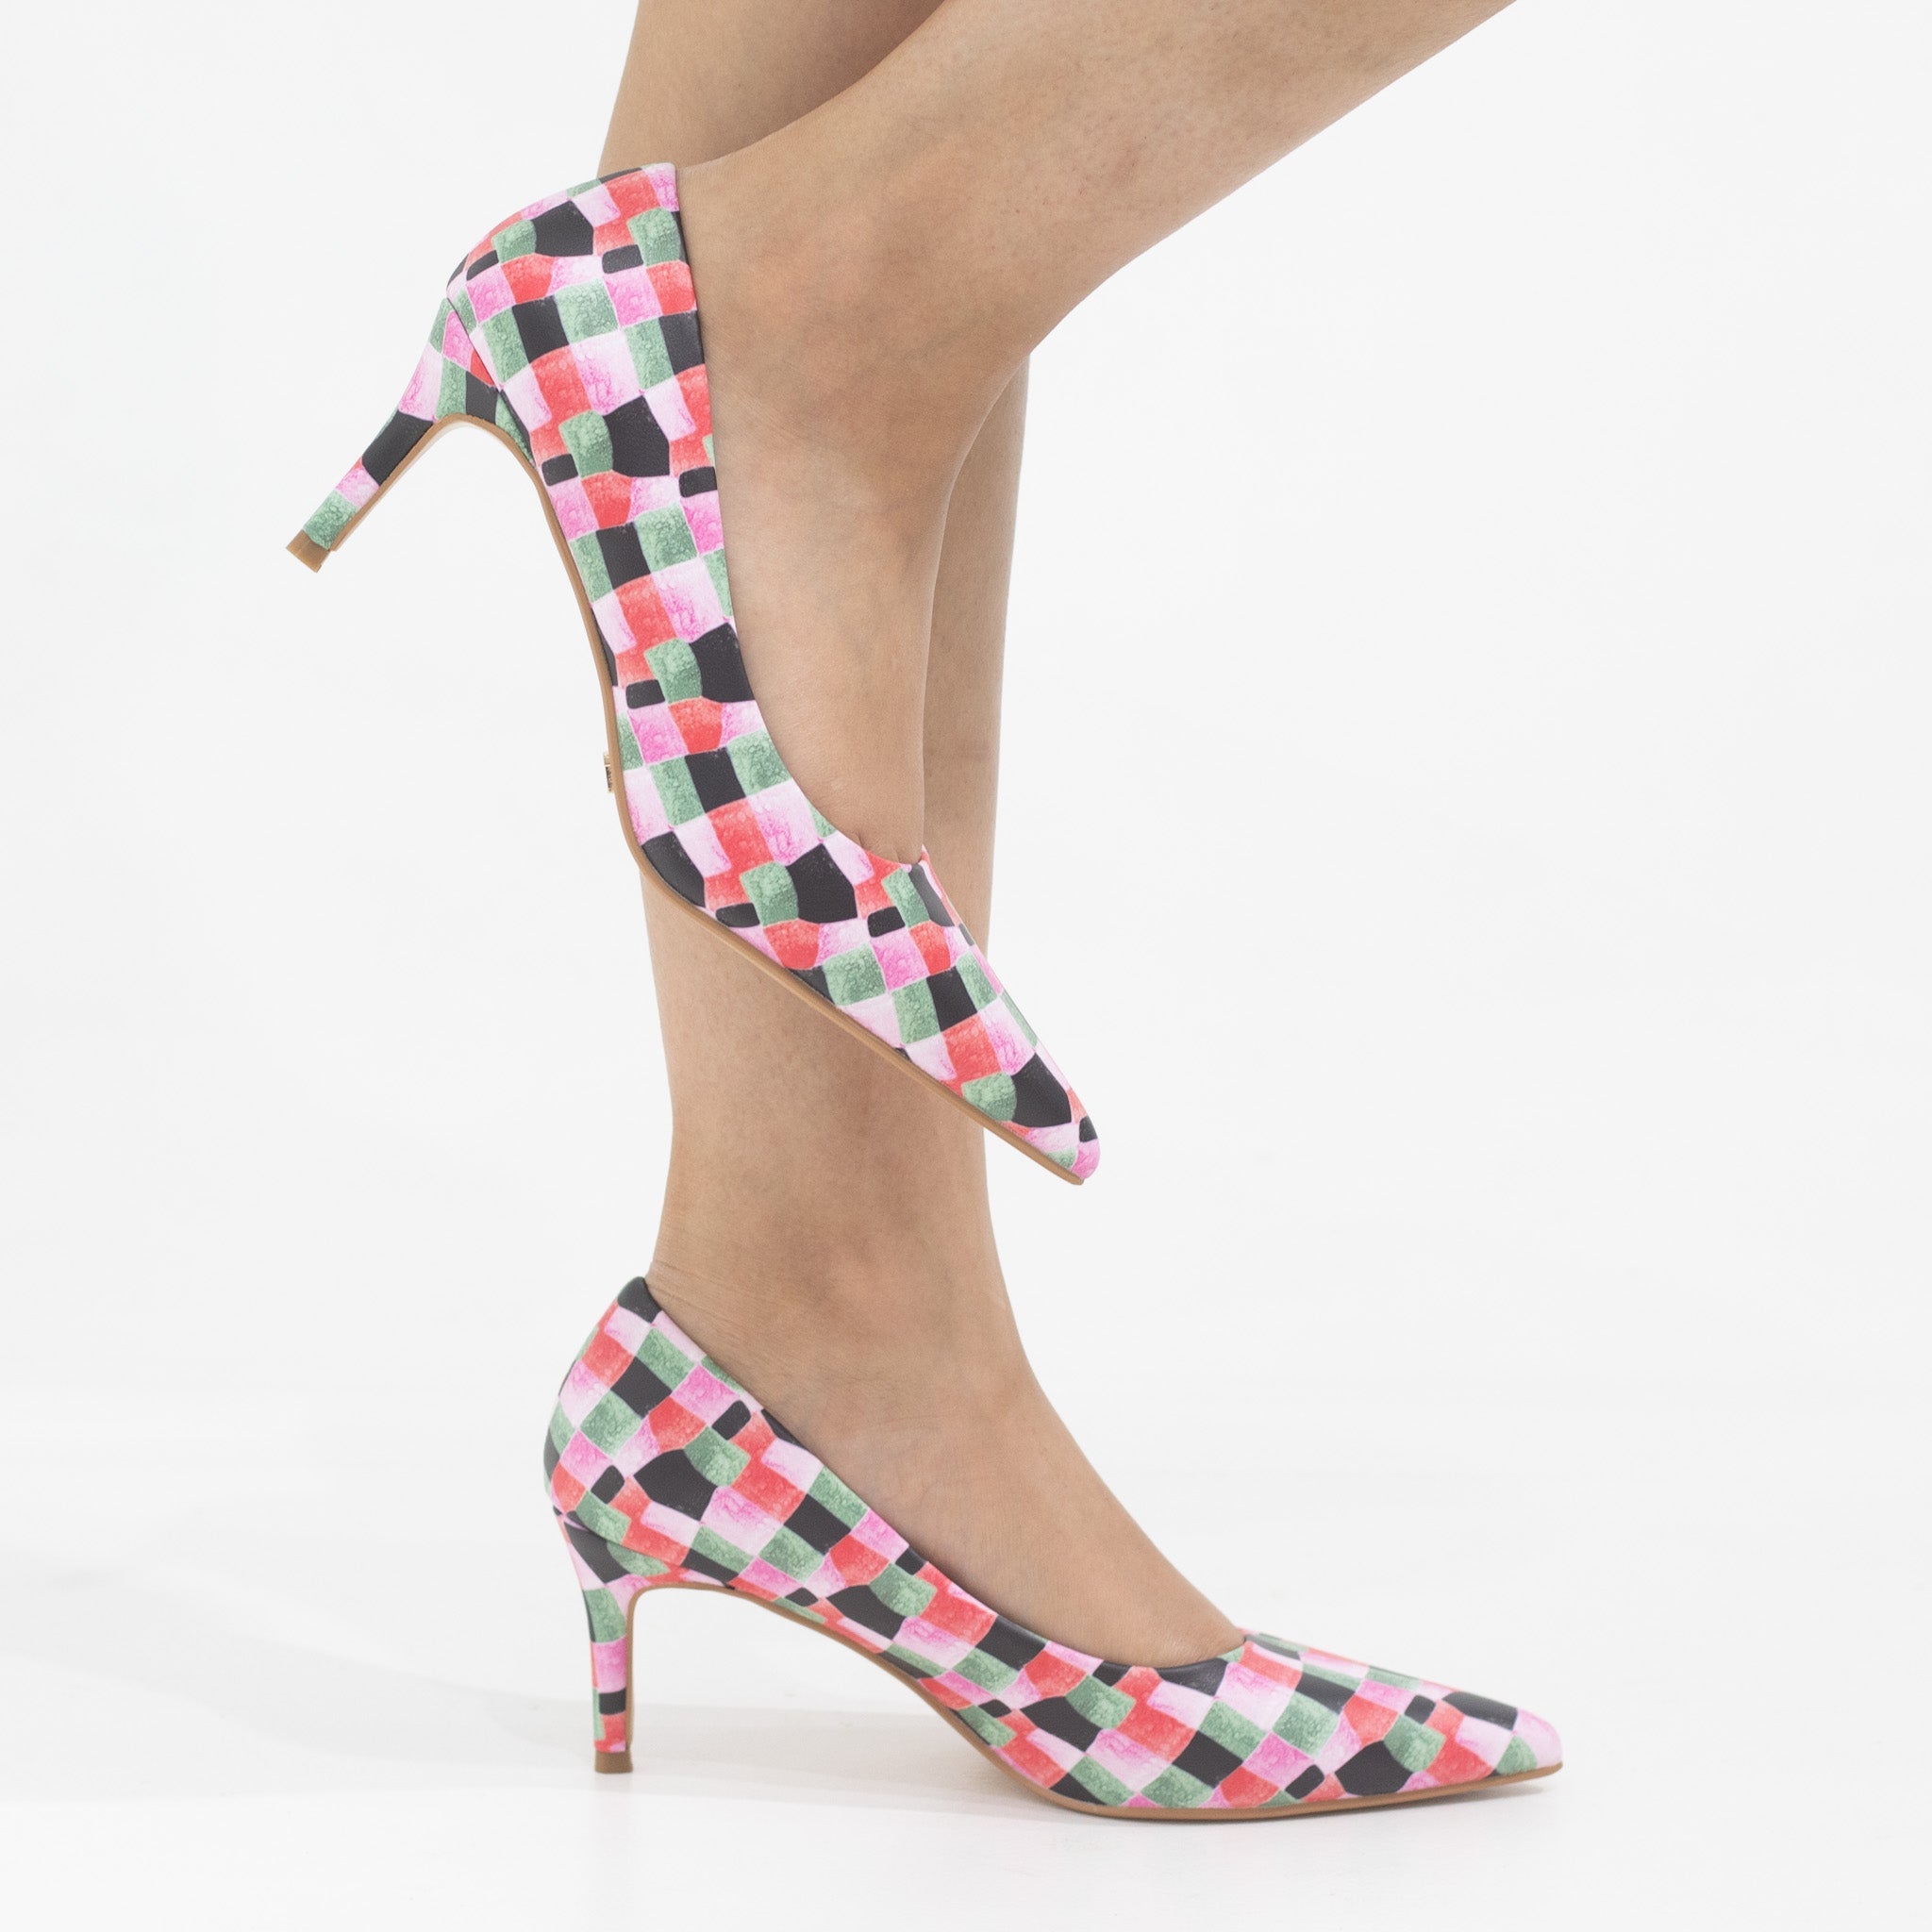 Banu 7cm heel  multi colored pointy court pink